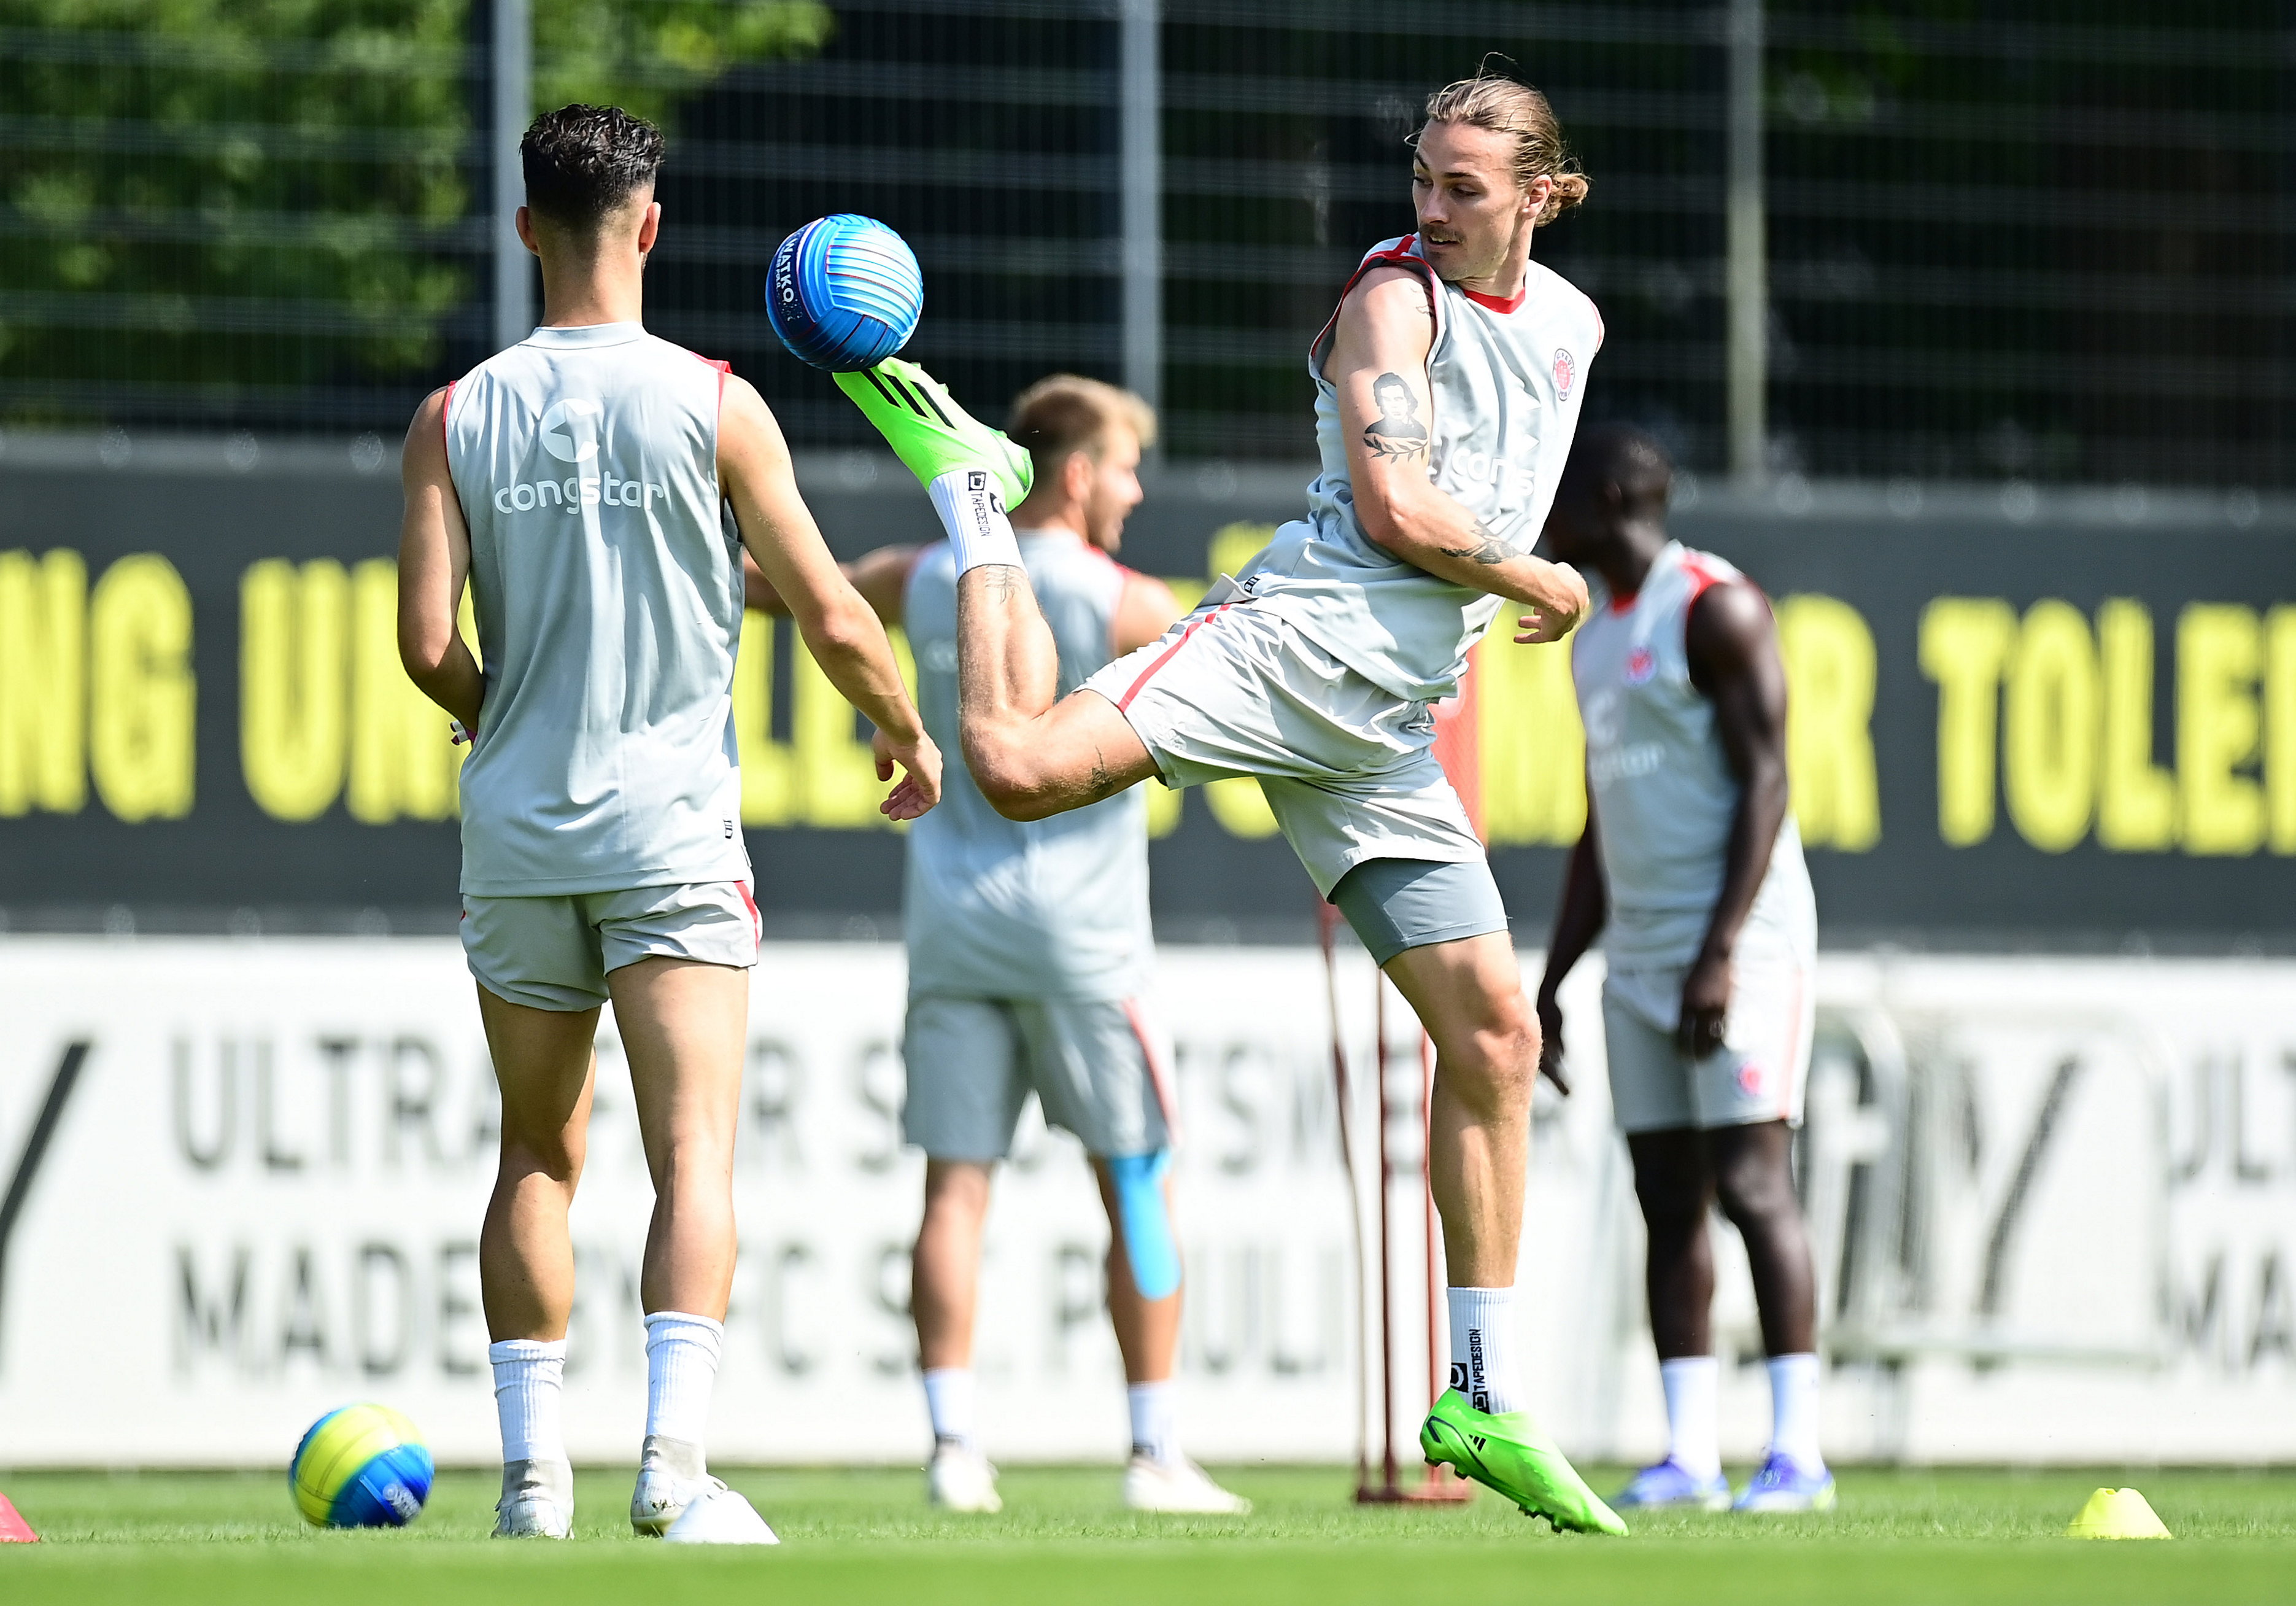 A moment of acrobatics from Jackson Irvine during Tuesday morning’s training session – under the watchful eye of Leart Paqarada (left).